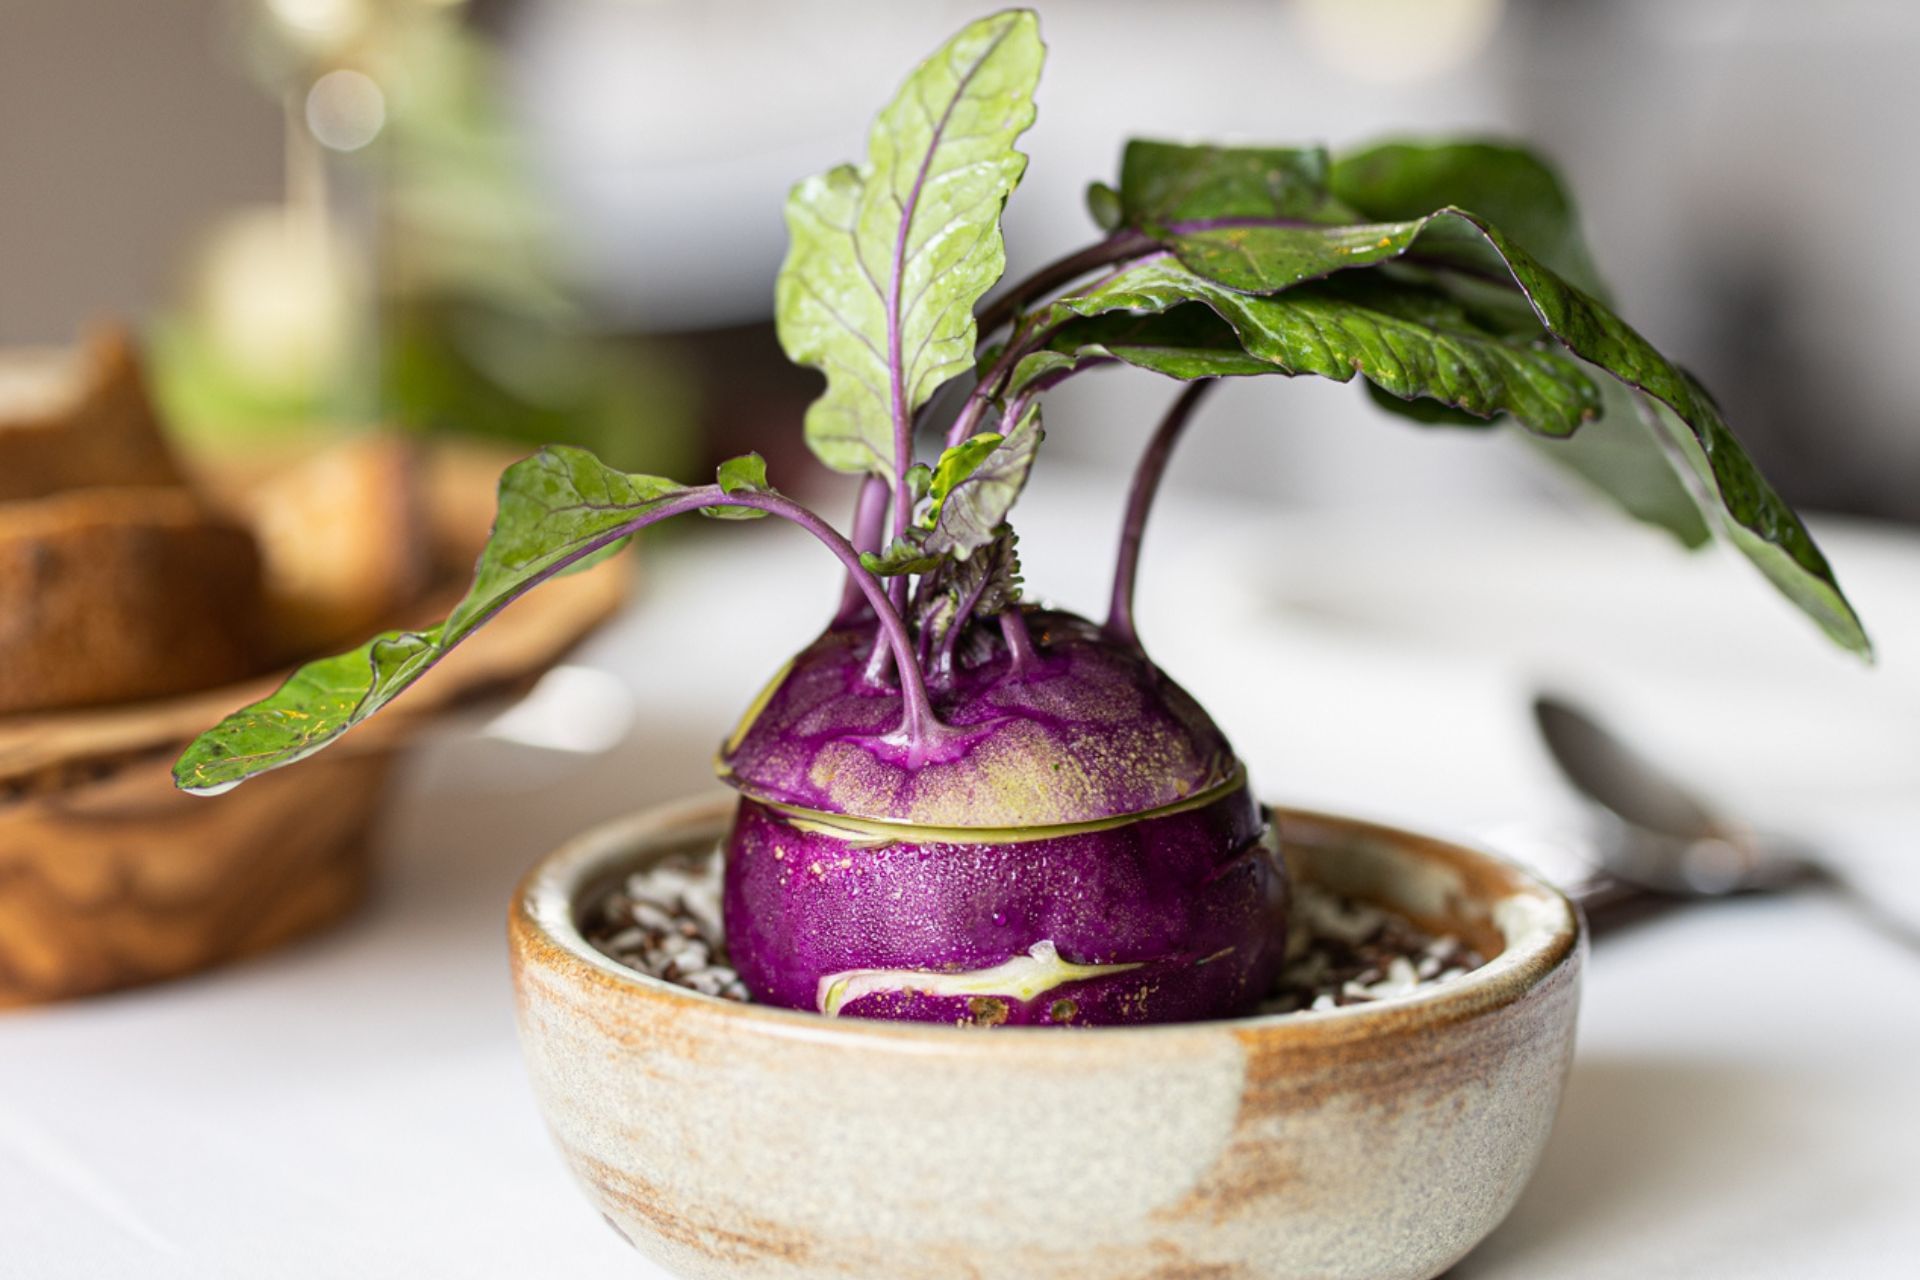 Kohlrabi dish served in The Chef at Domaine De Manville